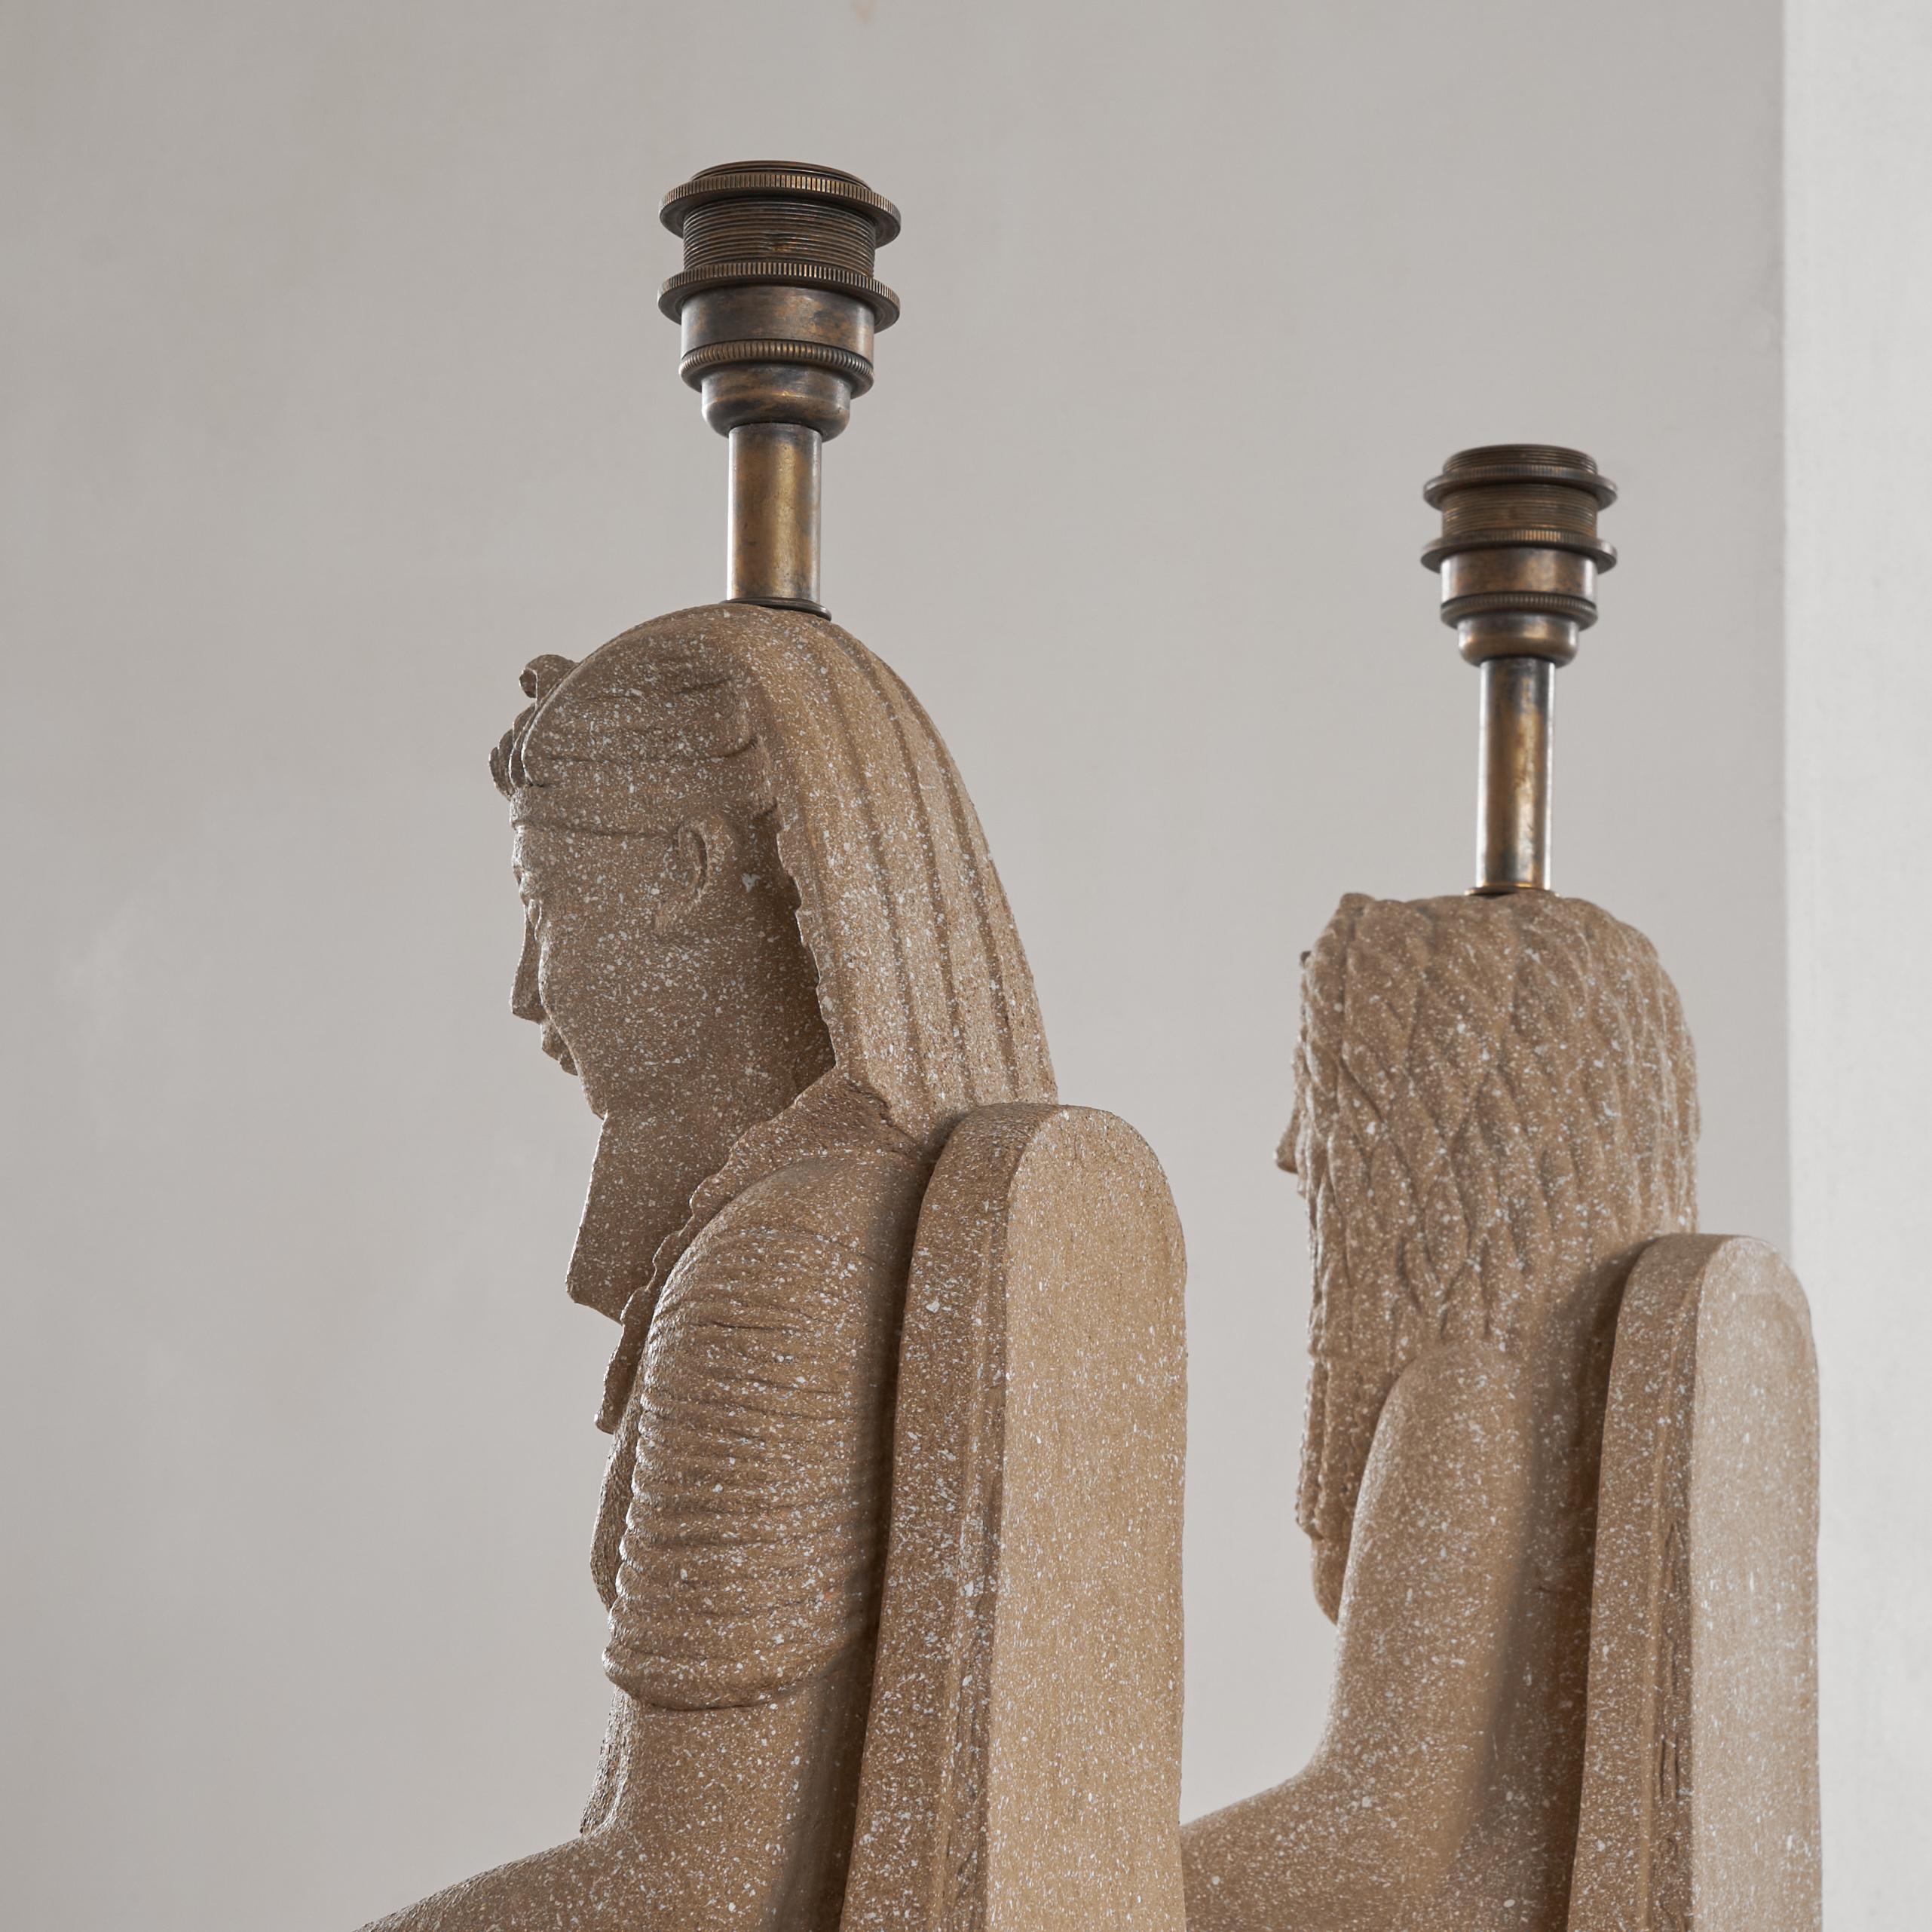 Zaccagnini Florence Pair of Monumental Pharaoh Ceramic Table Lamps Italy 1970s For Sale 6